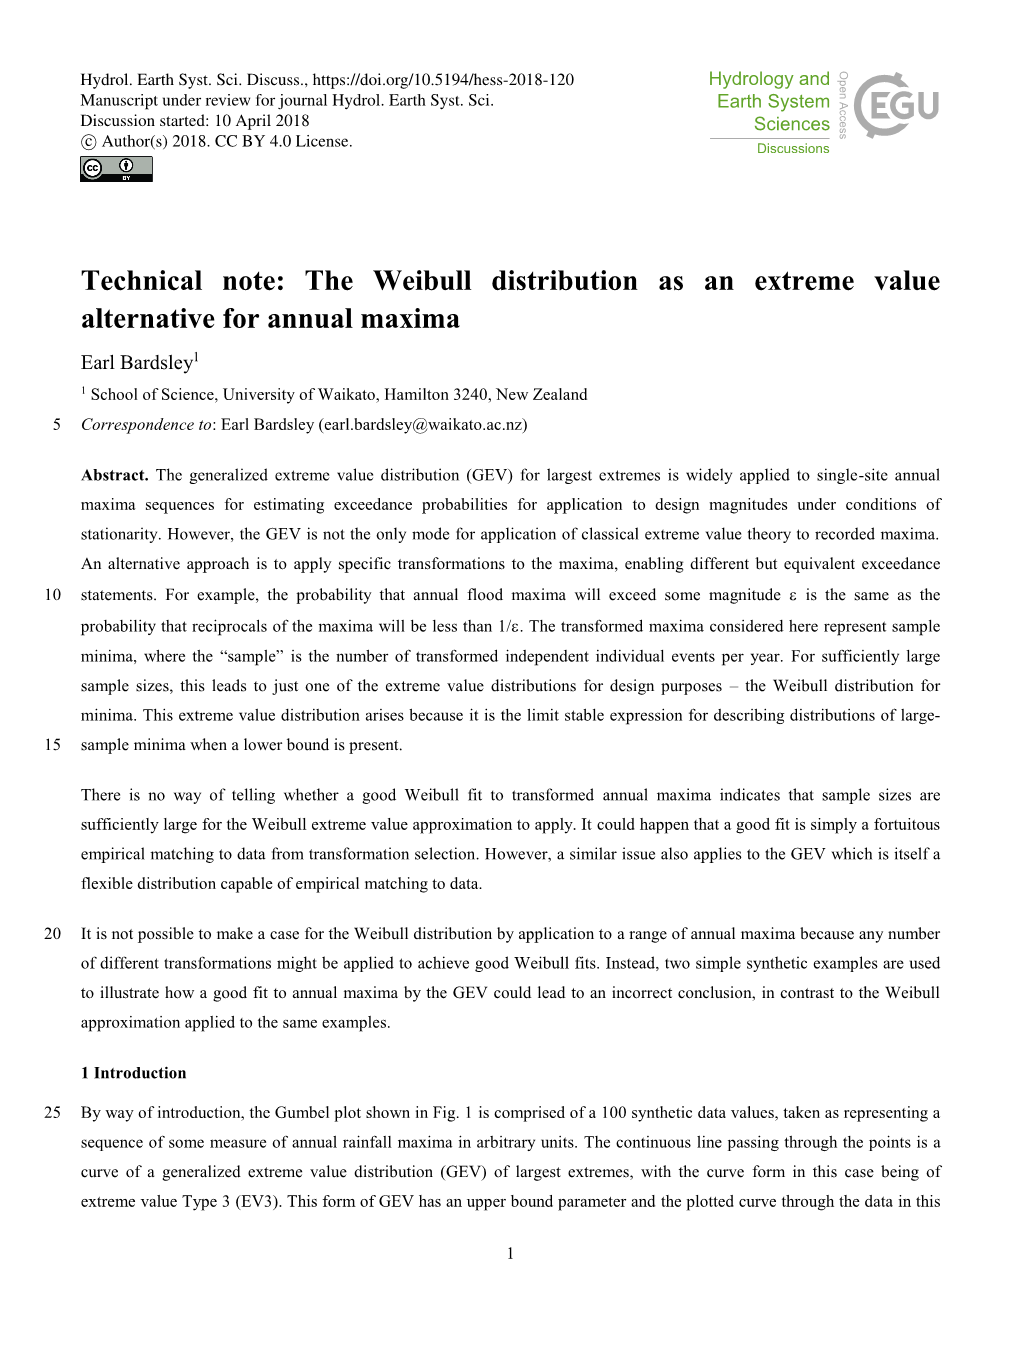 The Weibull Distribution As an Extreme Value Alternative for Annual Maxima